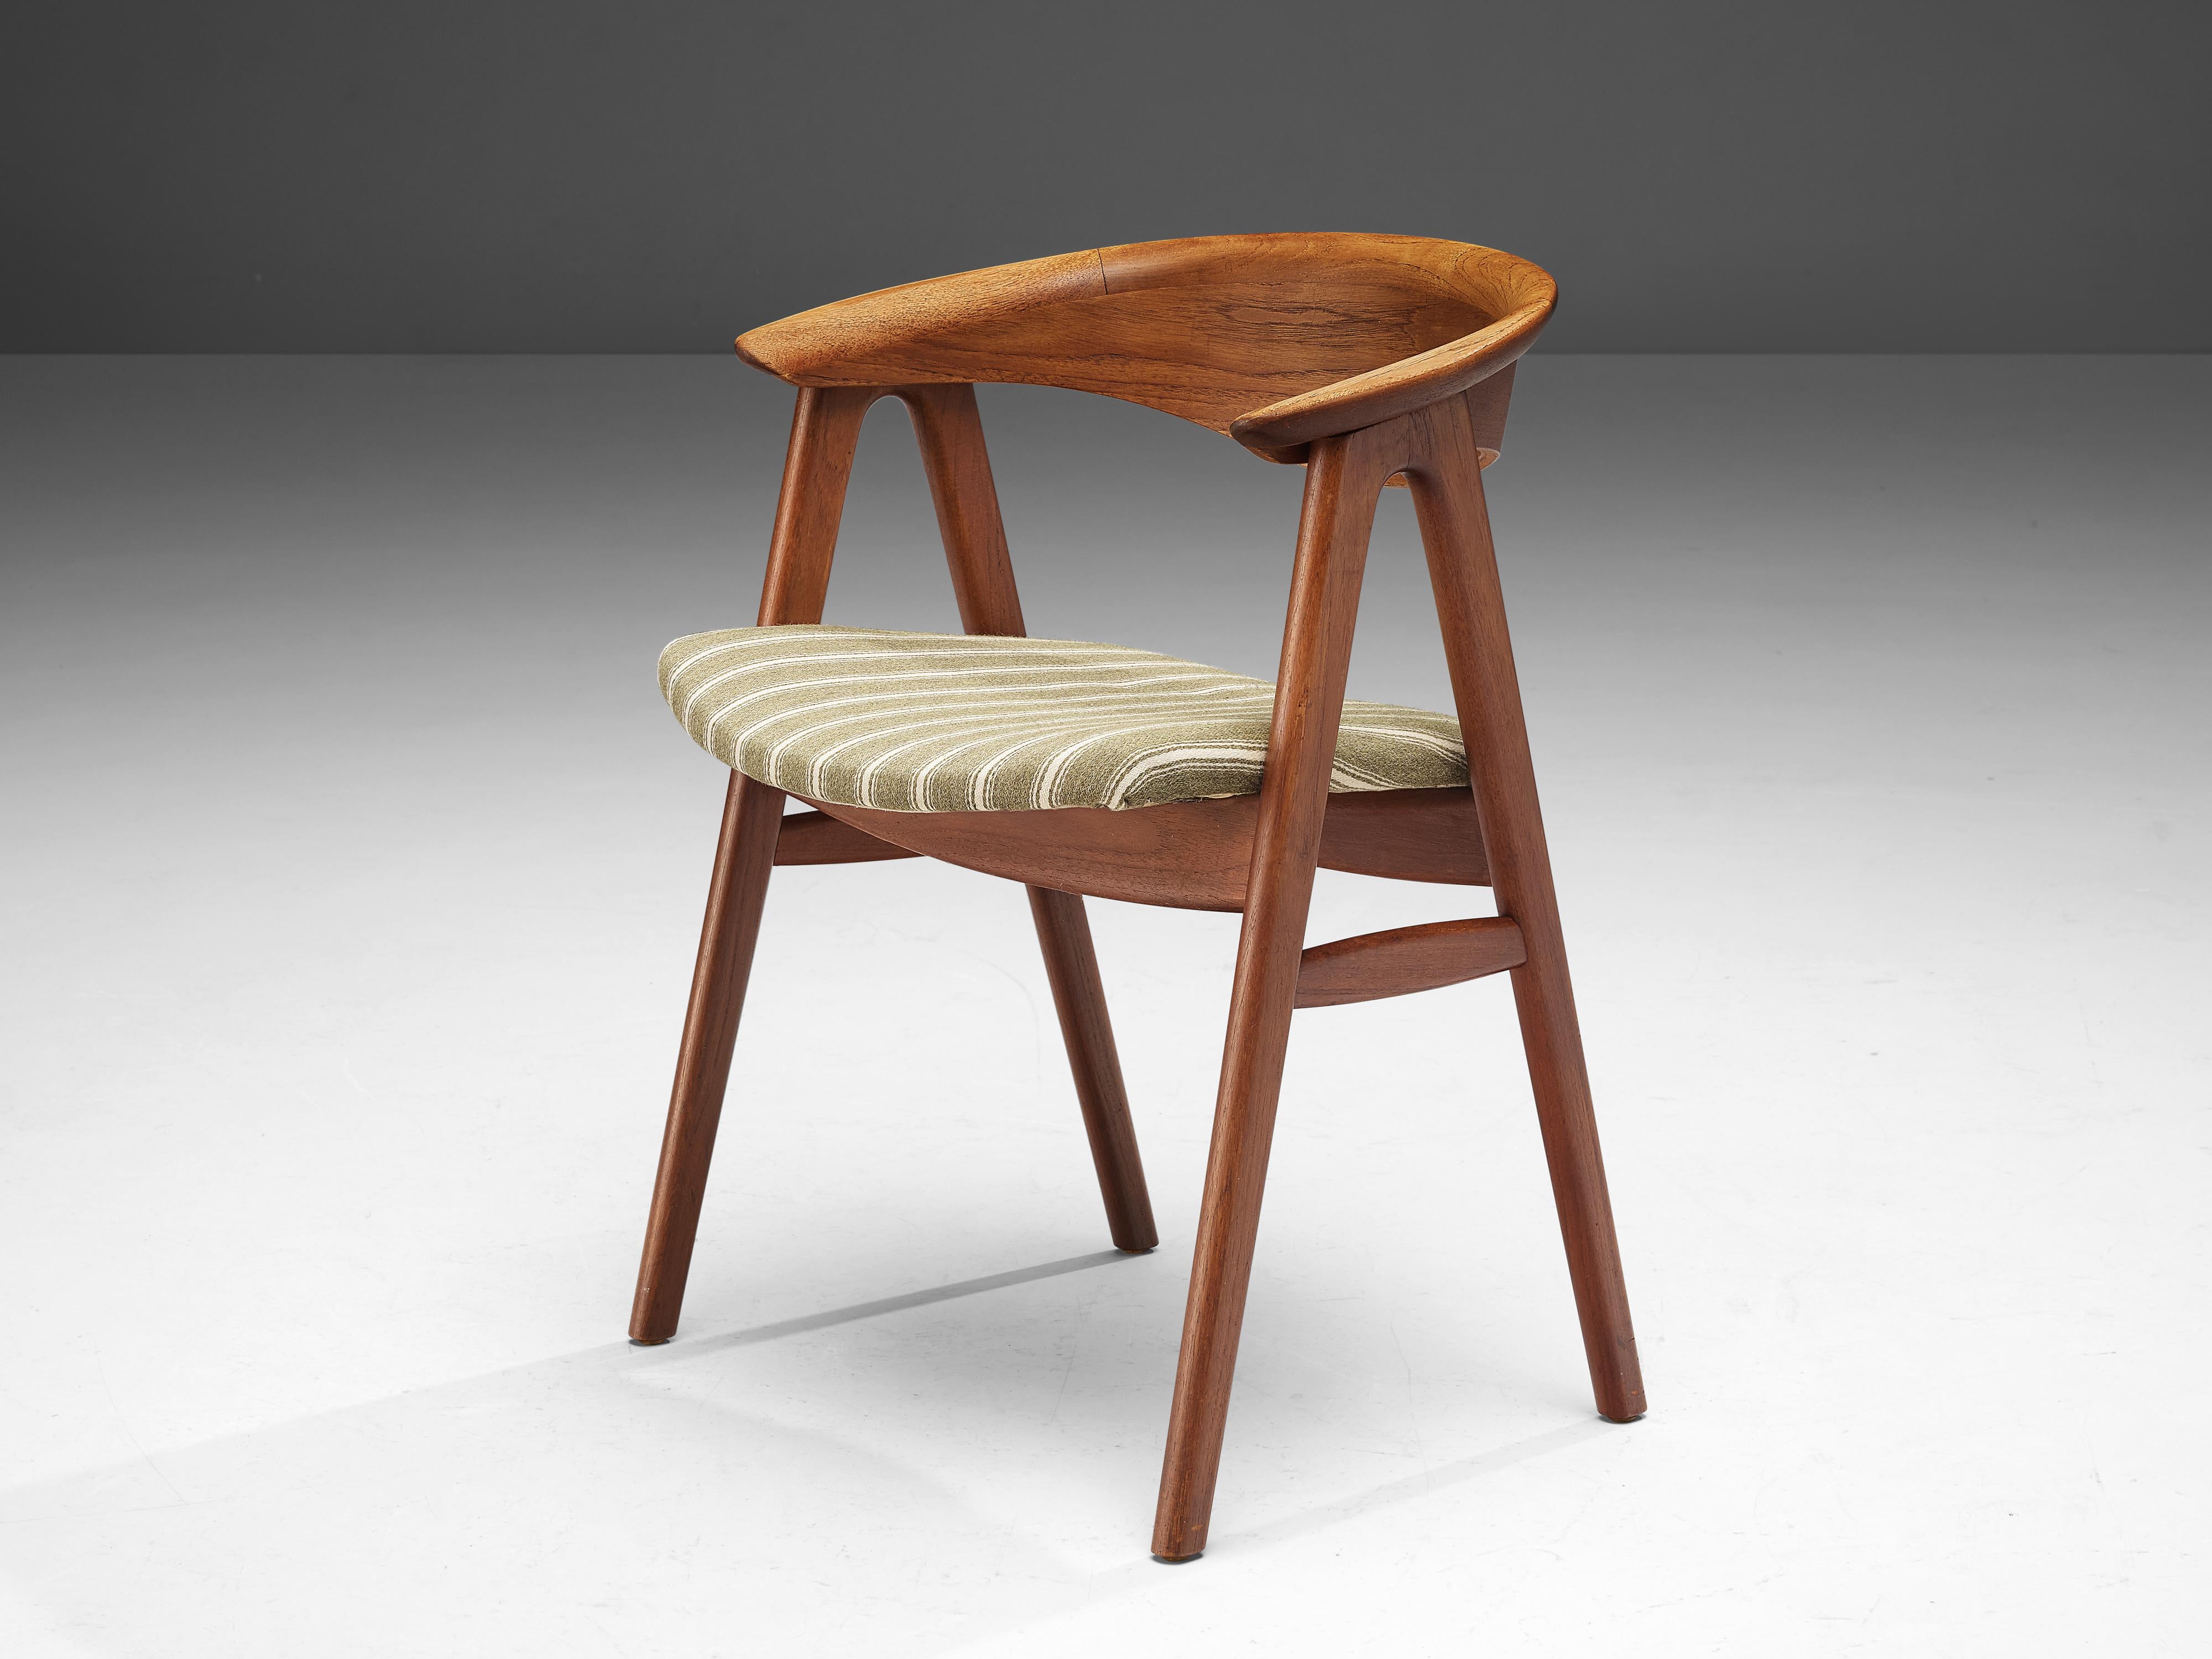 Erik Kirkegaard for Høng Stolefabrik, armchair, model '53', fabric, teak, Denmark, 1950s

Well-constructed dining chair designed by Erik Kirkegaard for Høng Stolefabrik. Excellent comfort is guaranteed by means of the ergonomic proportions of the